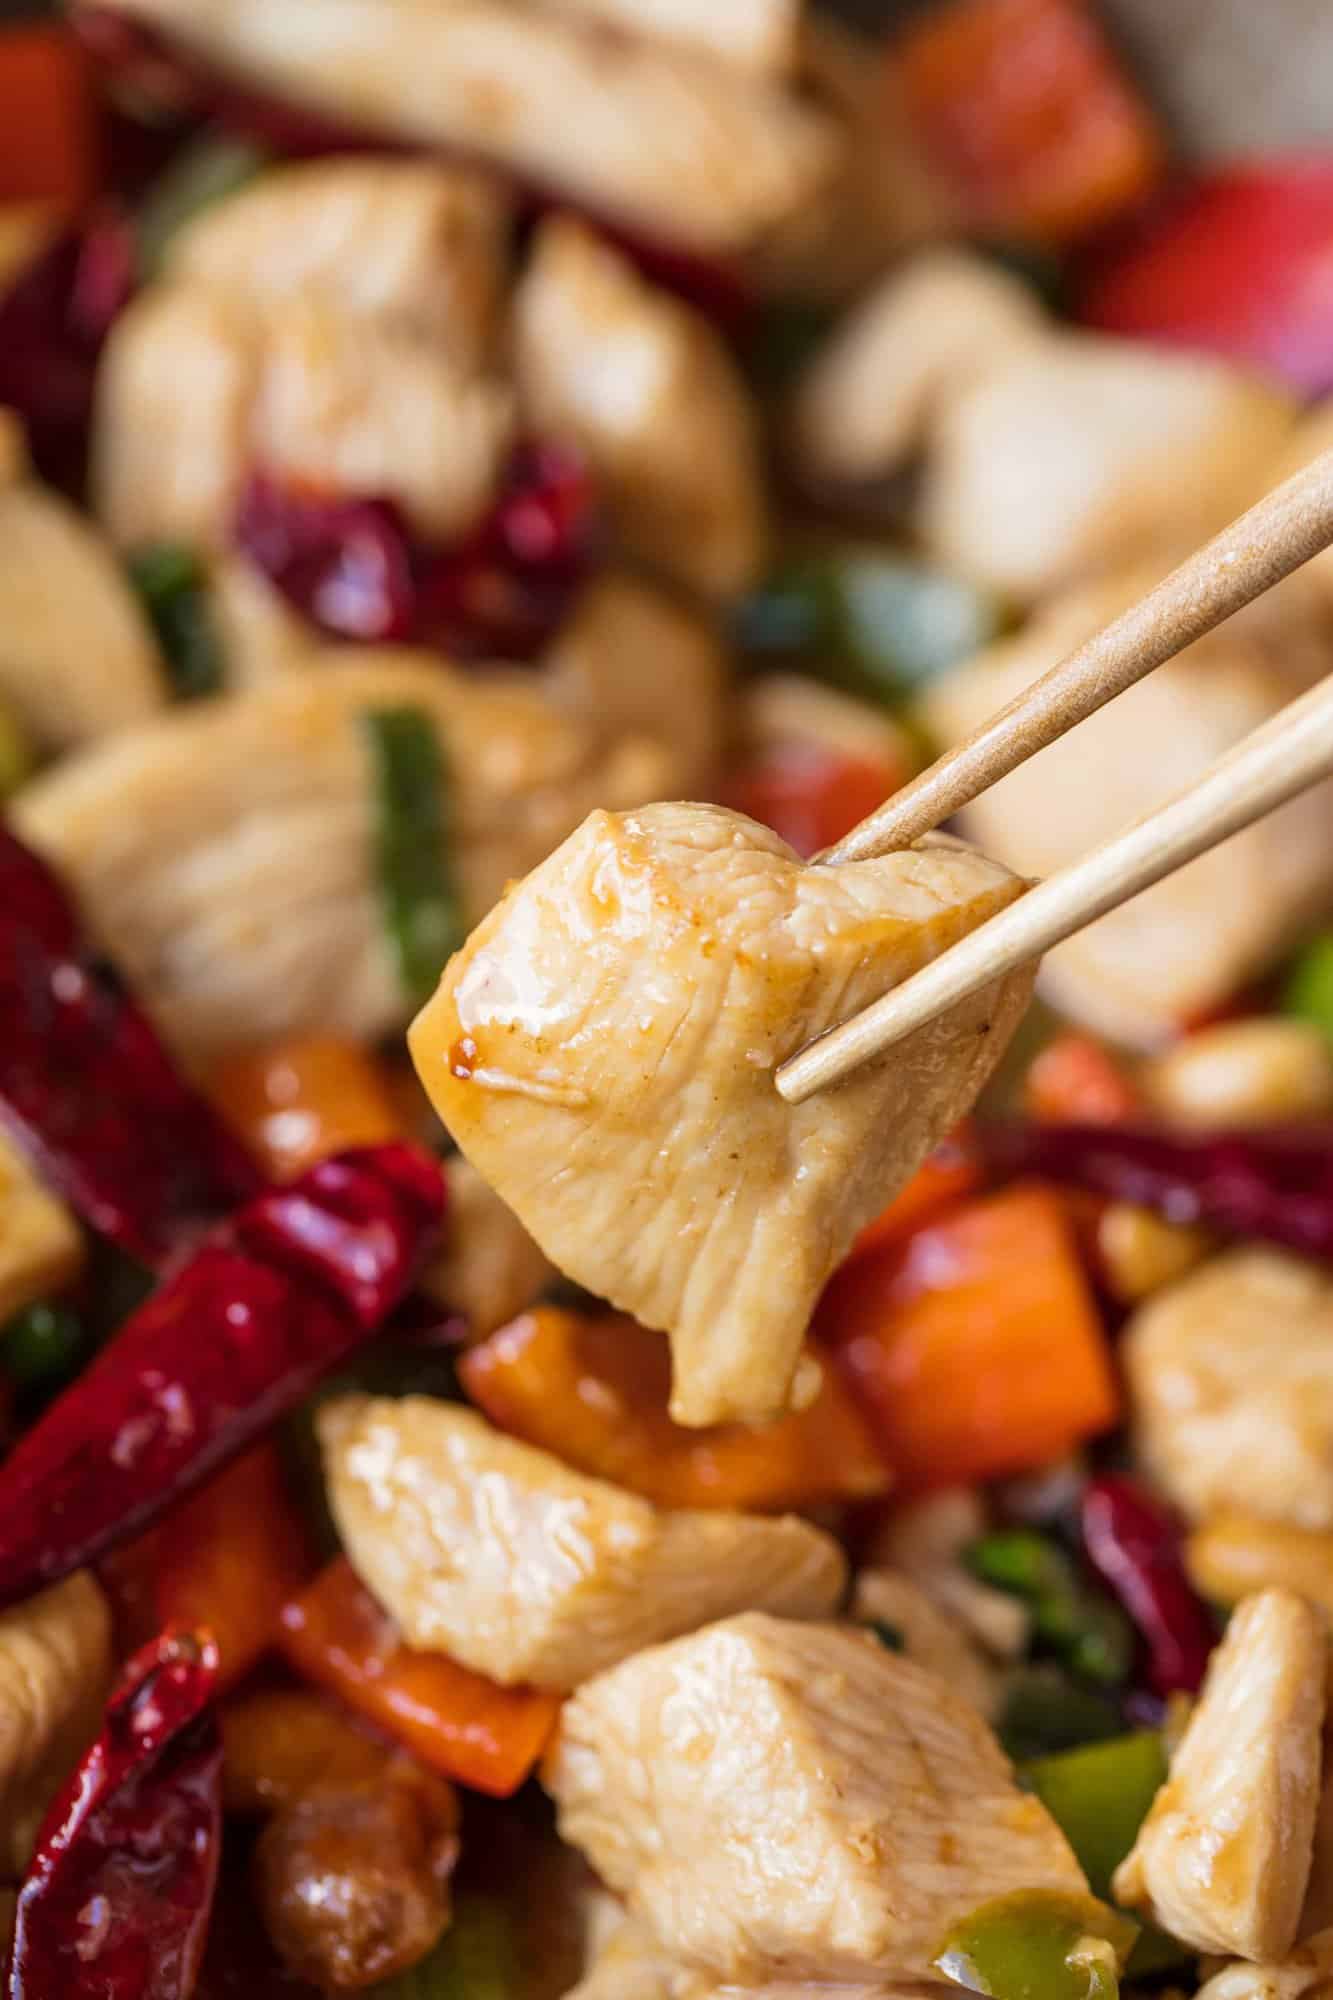 Skip the takeout and make this quick and easy Kung Pao Chicken at home. It takes just 15 minutes to make which means you may never order takeout again!